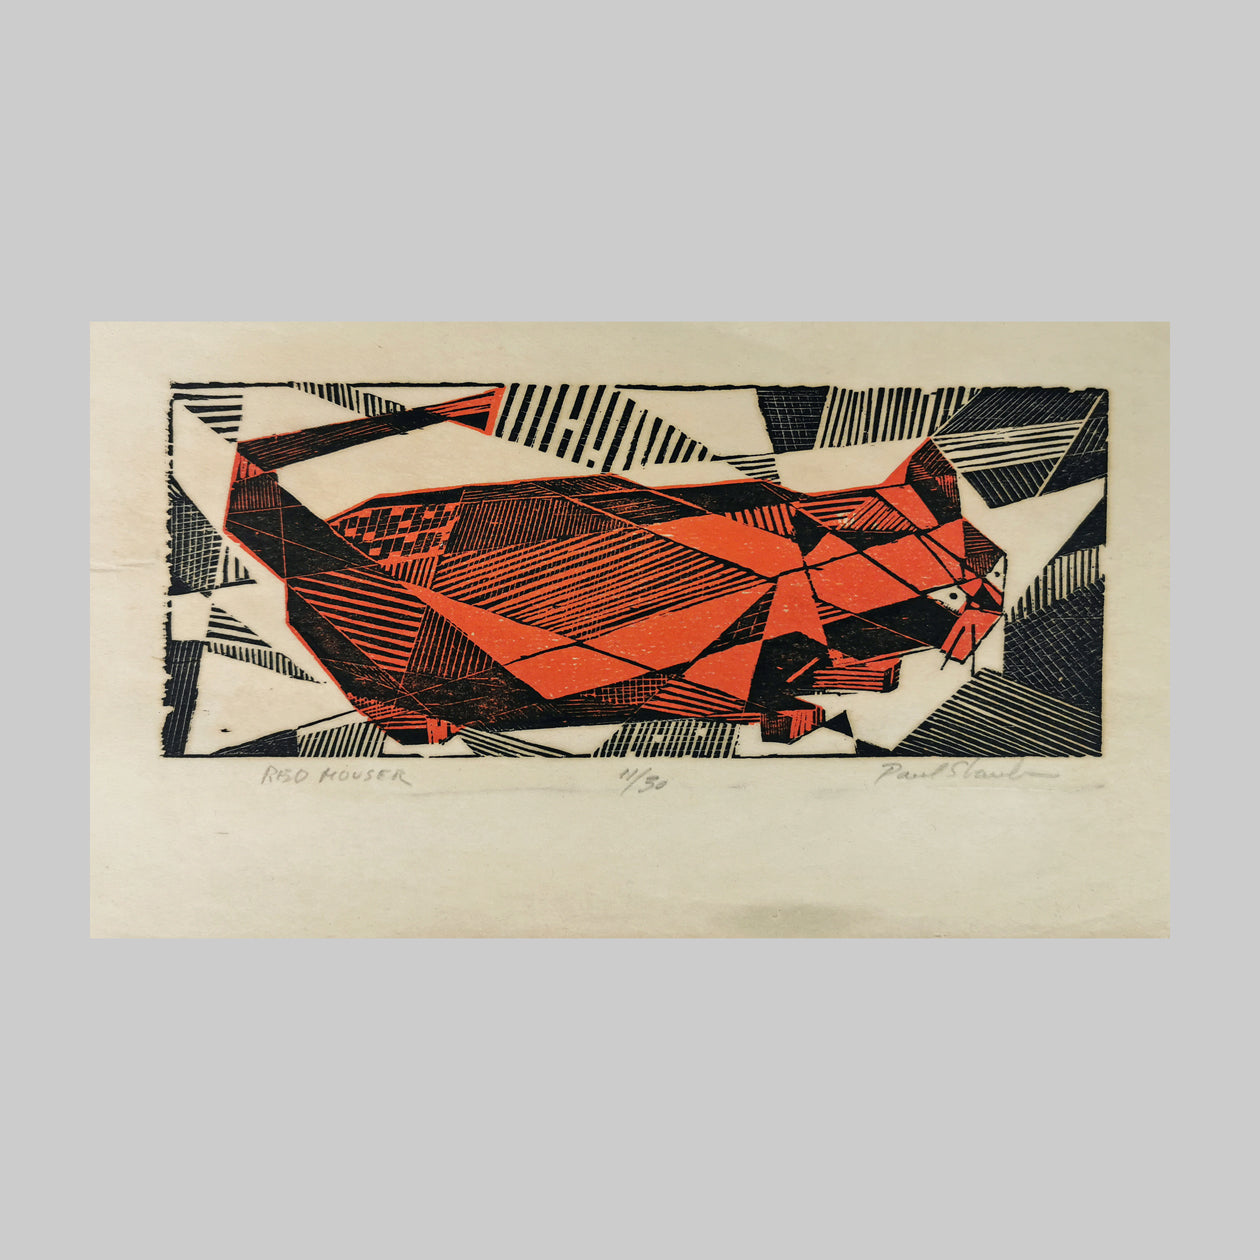 Paul Schaub etching red mouser